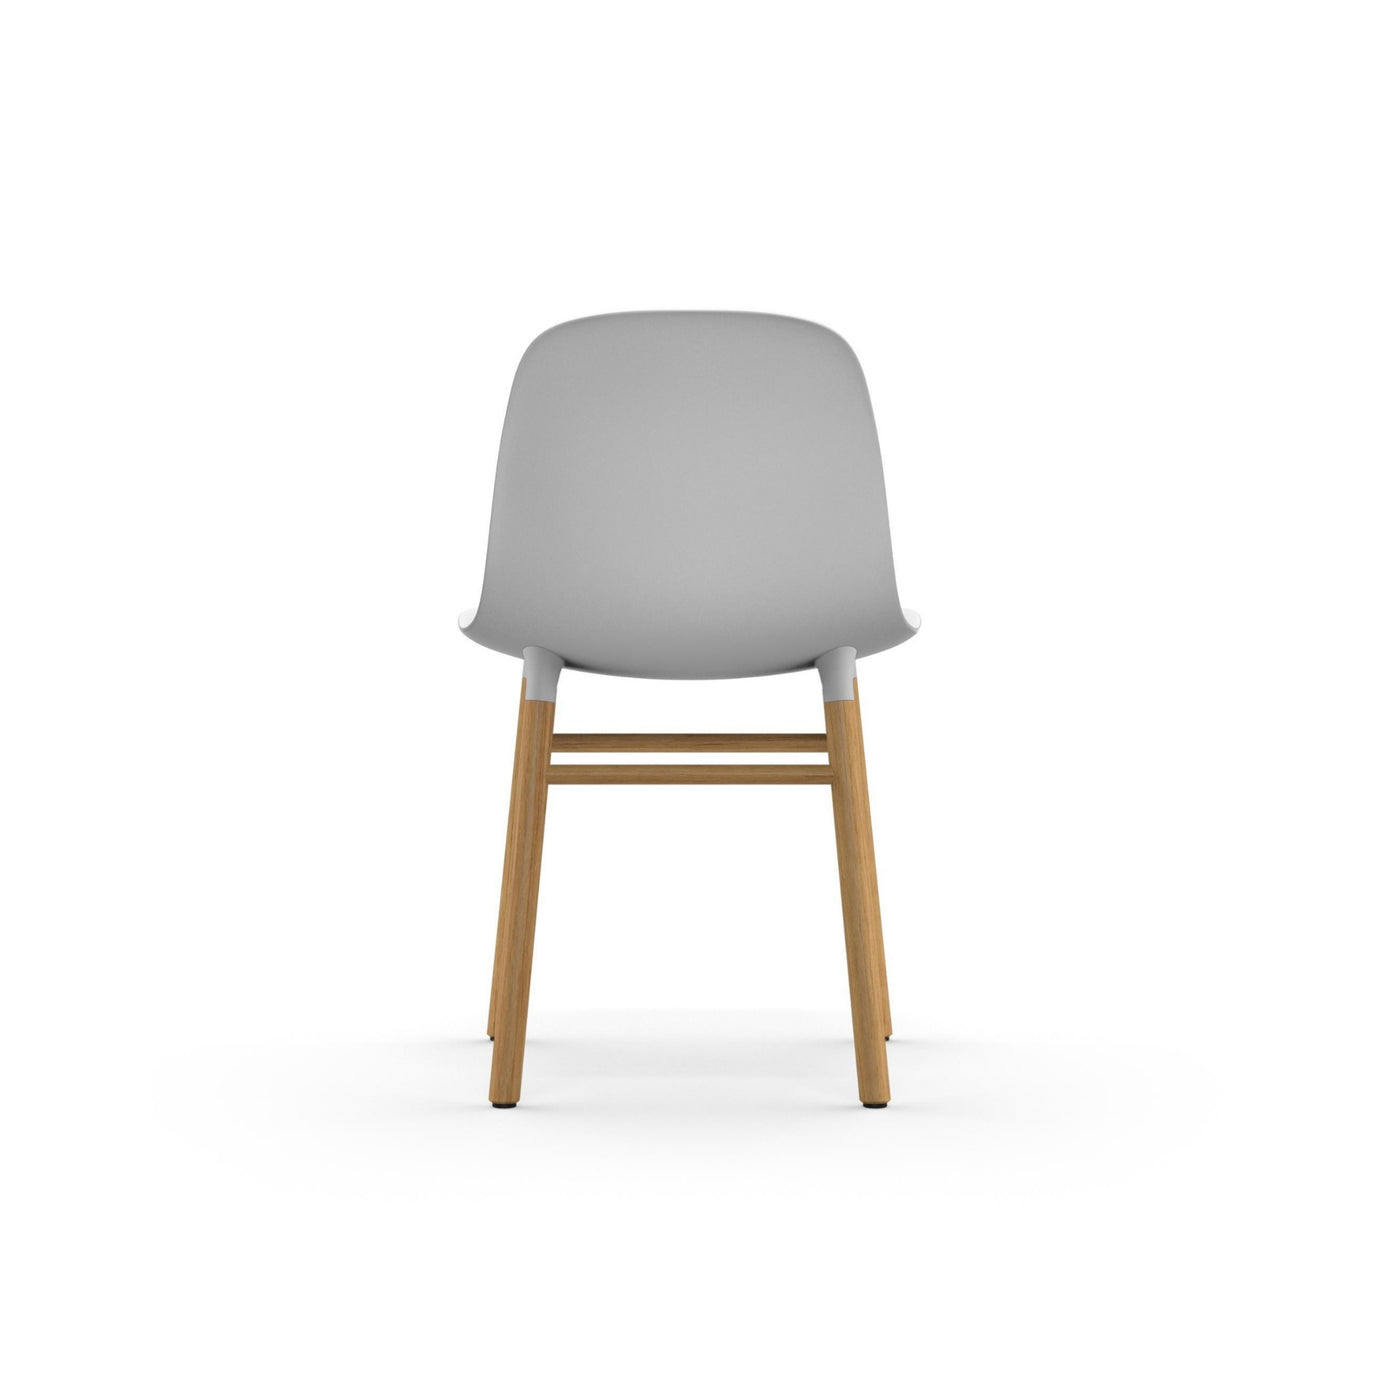 Normann Copenhagen Form Chair Wood at someday designs. #colour_white